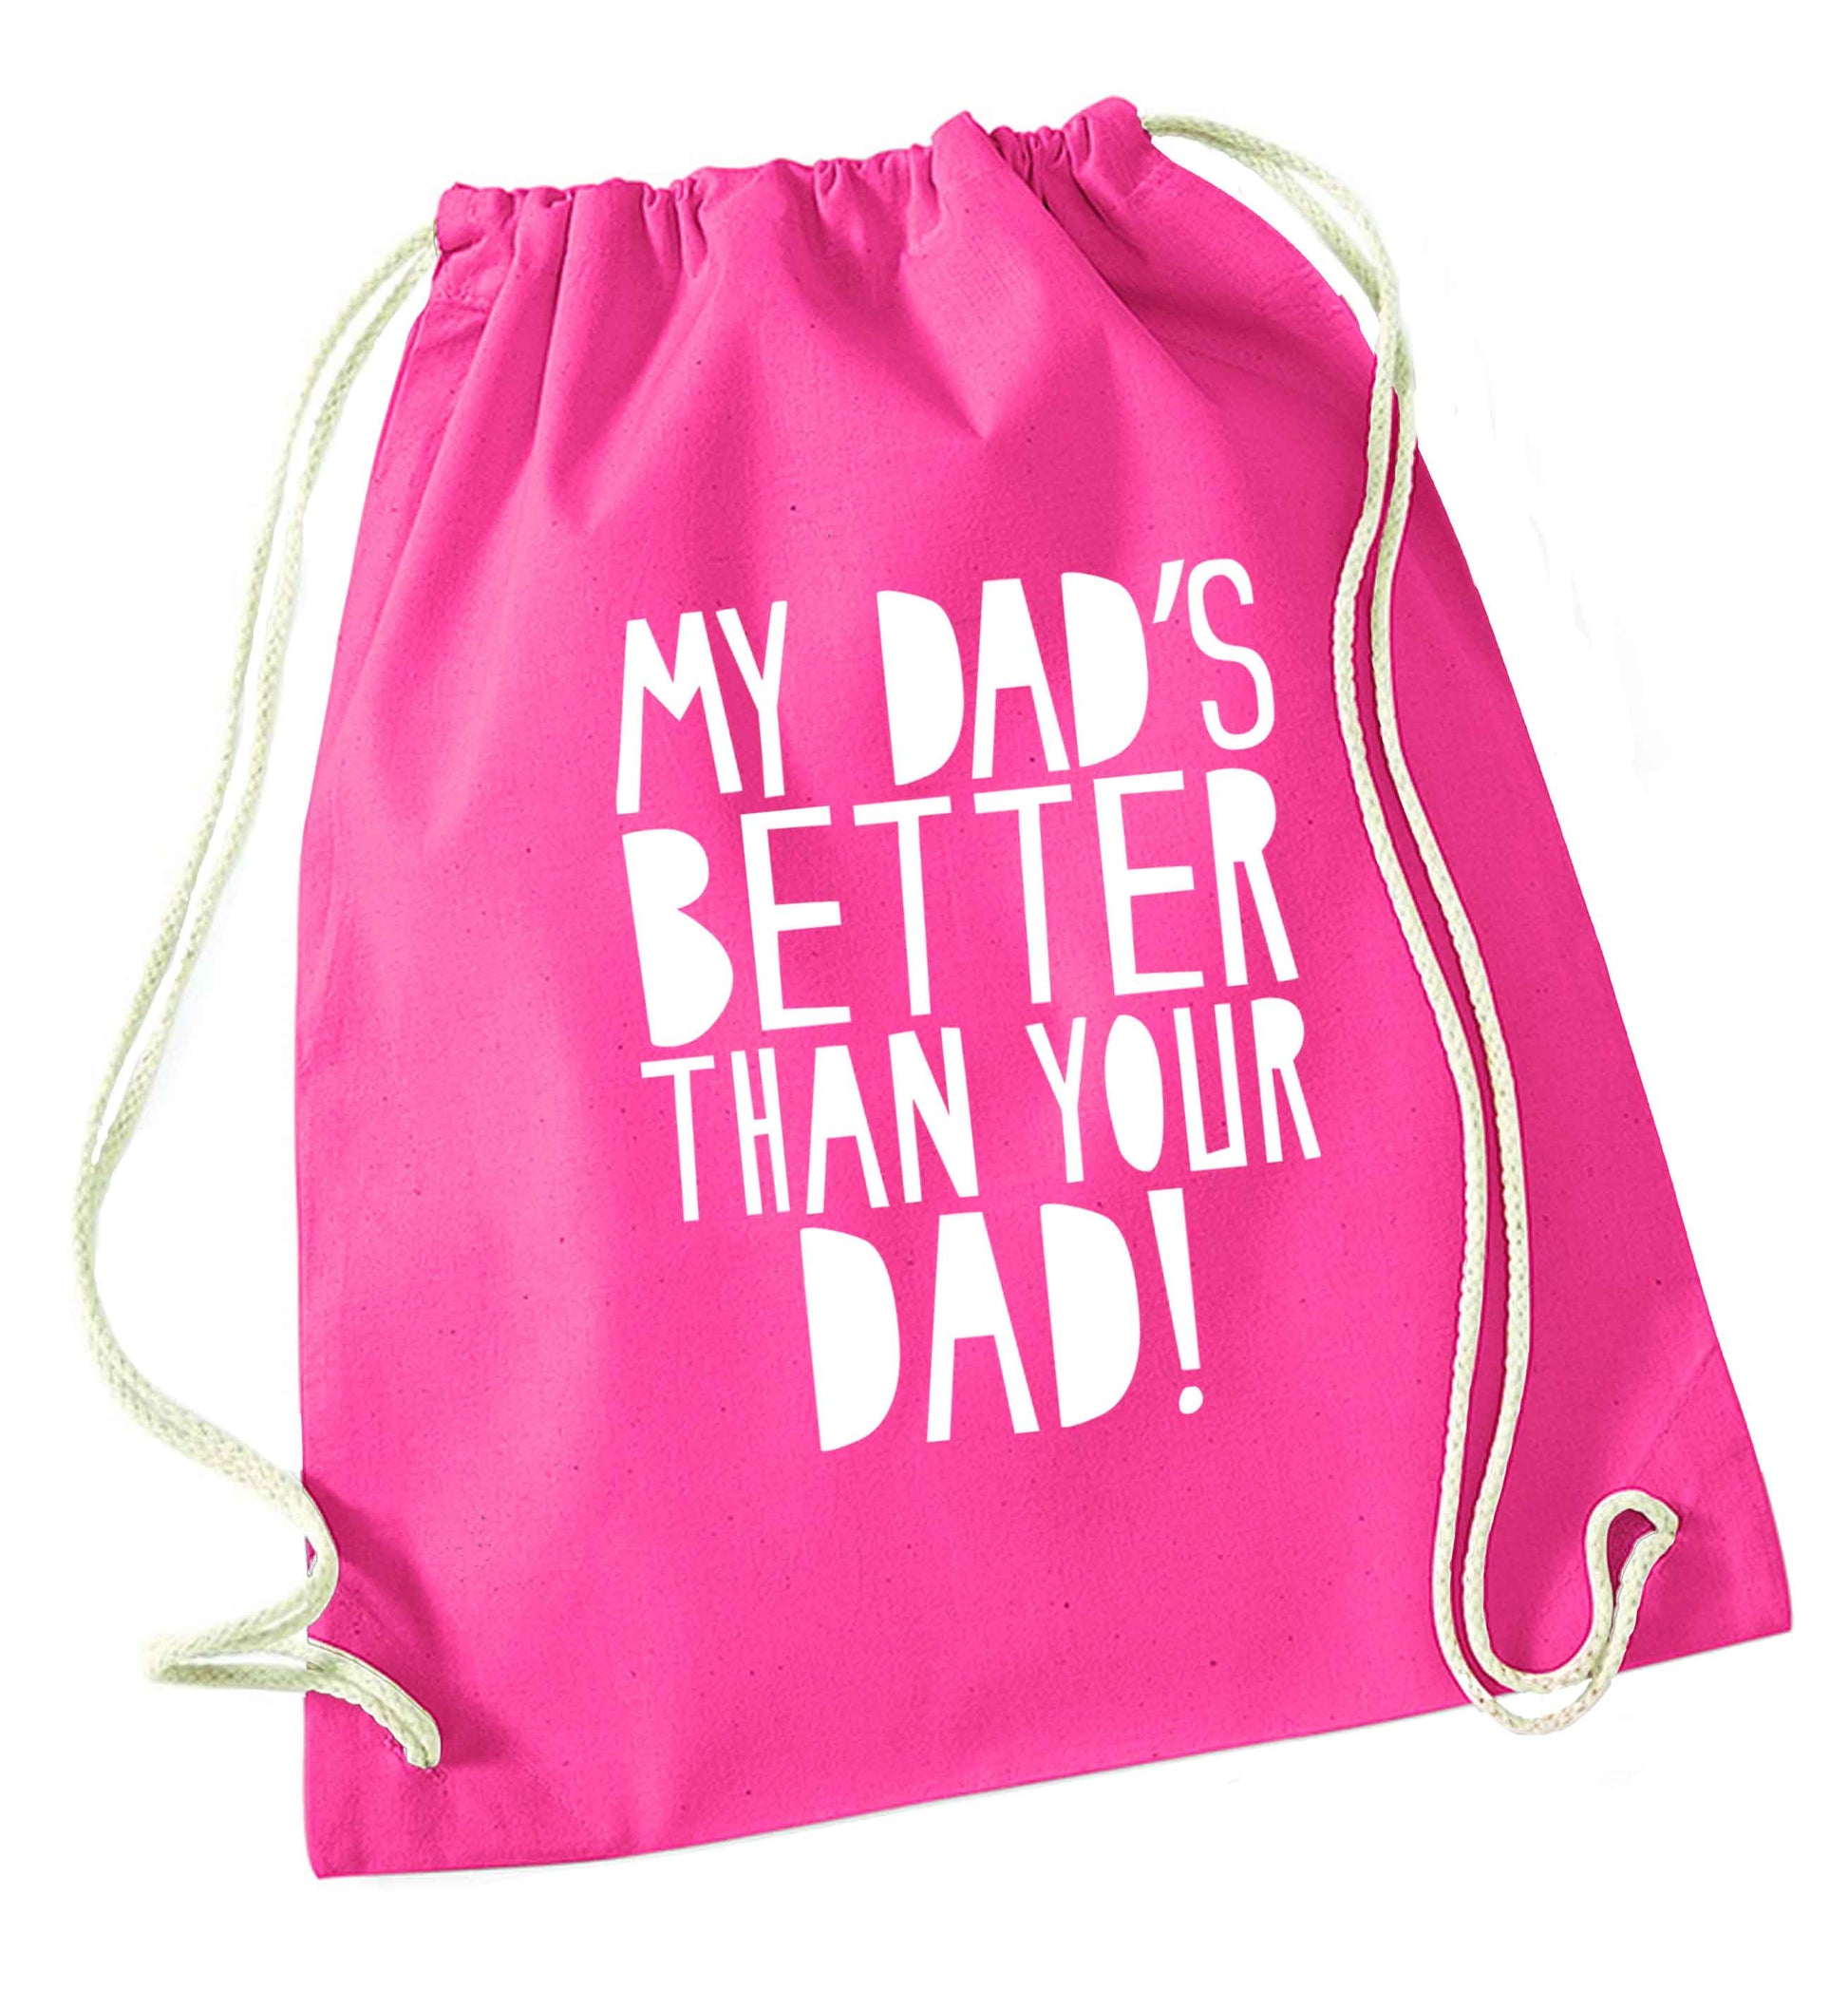 My dad's better than your dad! pink drawstring bag